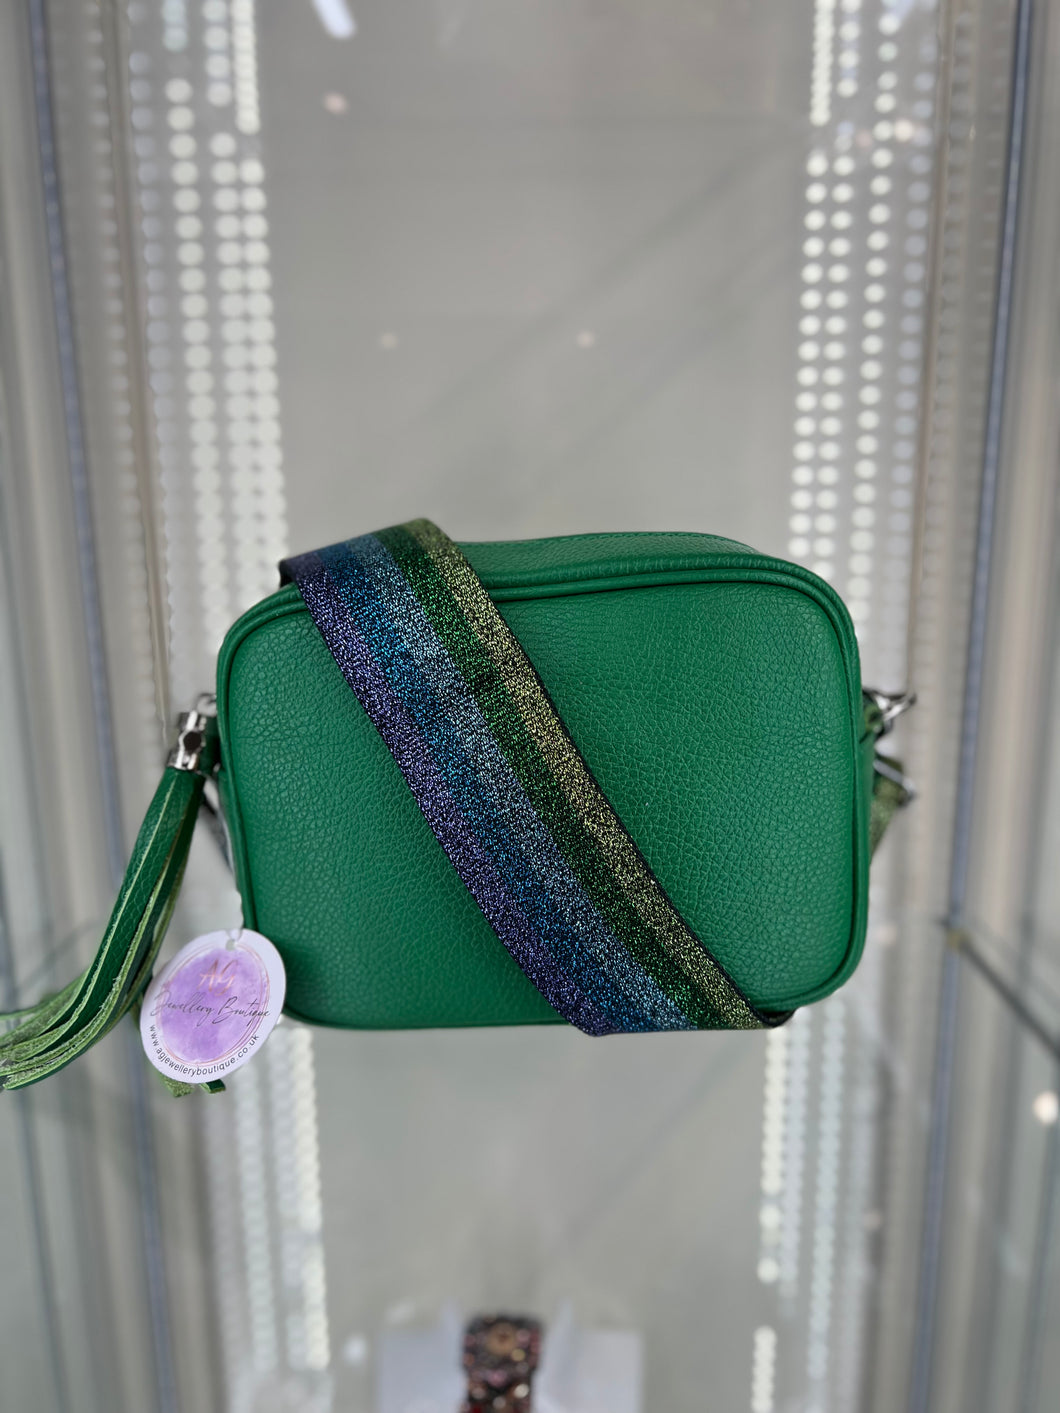 Real Leather Green bag with Purple/Green striped strap